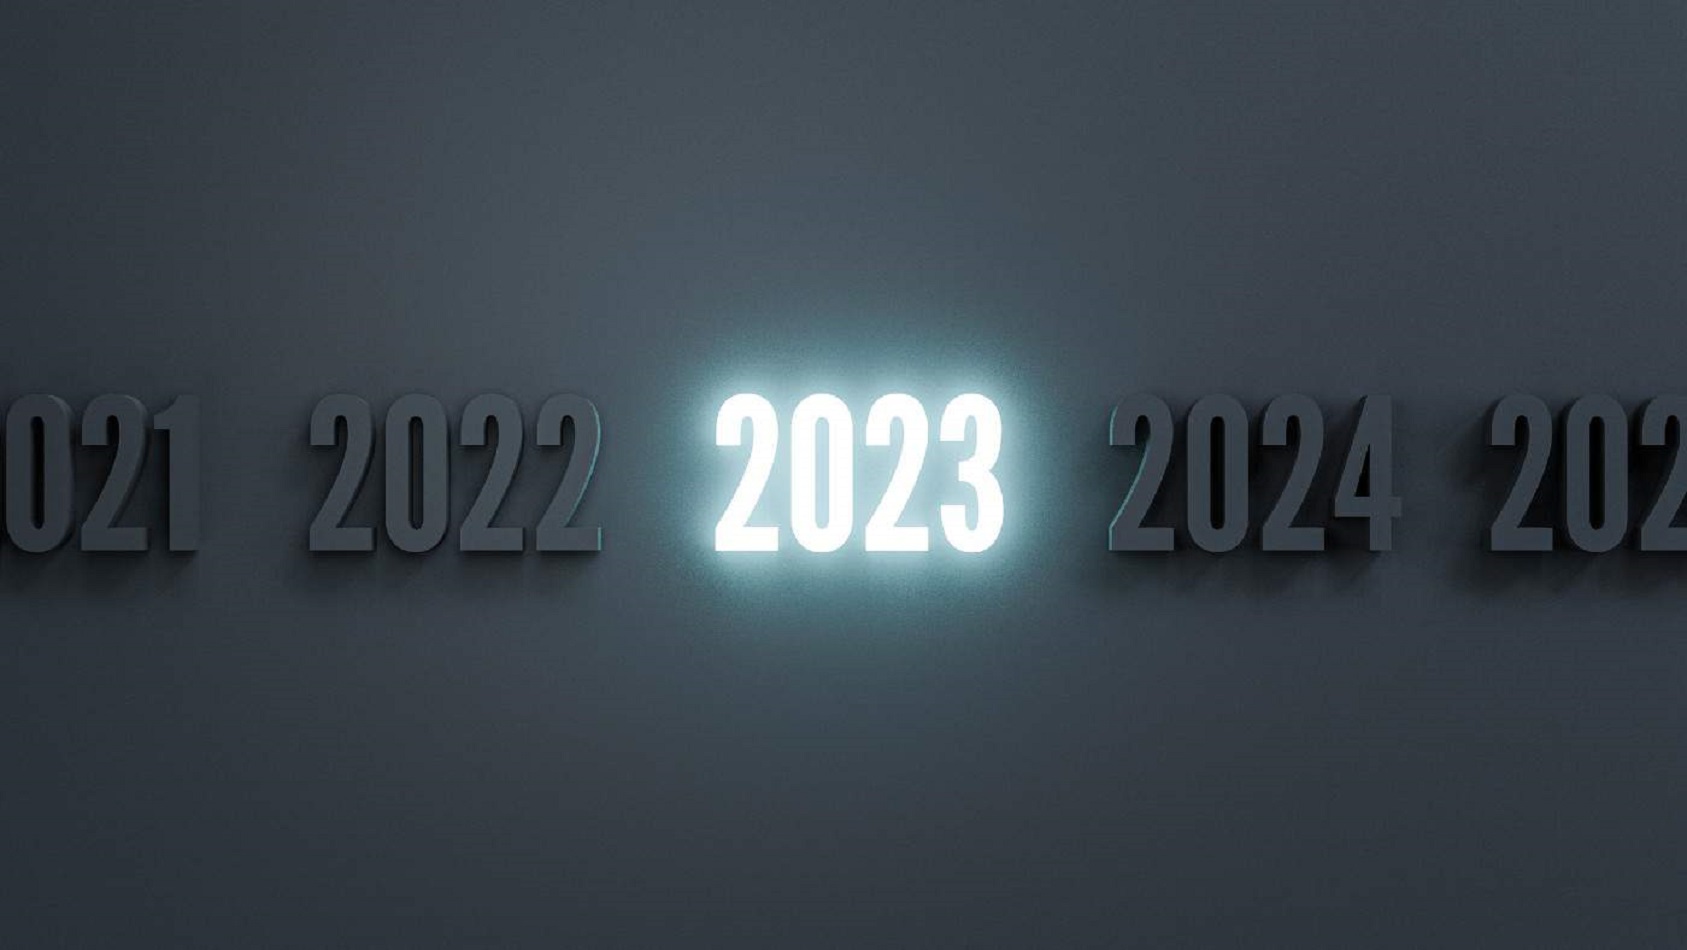 What to Expect from the Government in 2023? More of the Same